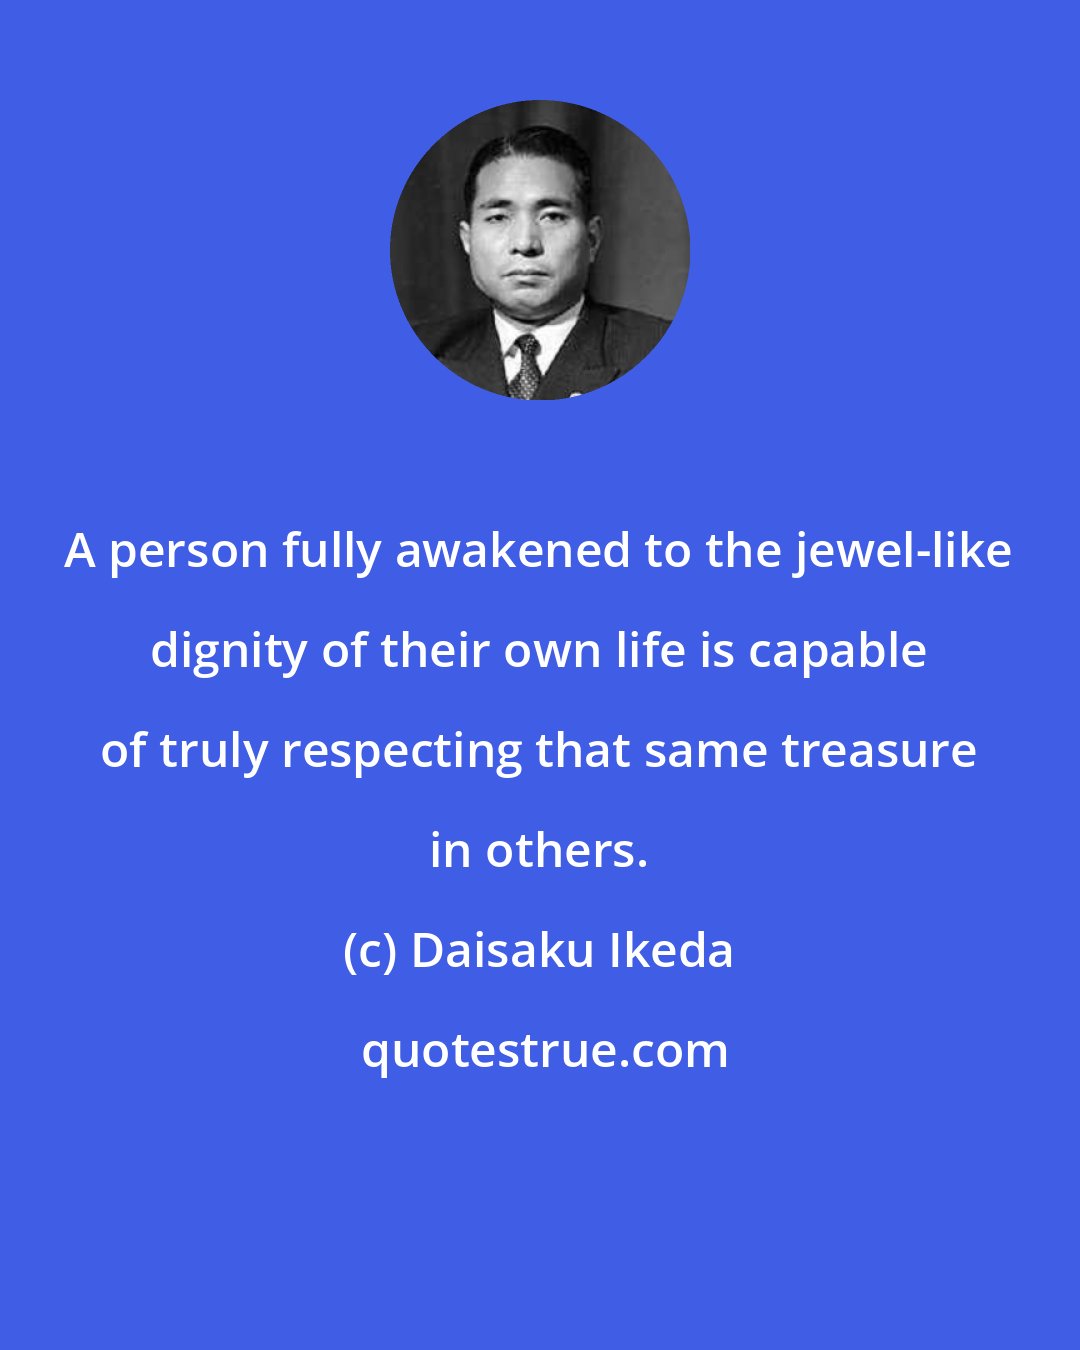 Daisaku Ikeda: A person fully awakened to the jewel-like dignity of their own life is capable of truly respecting that same treasure in others.